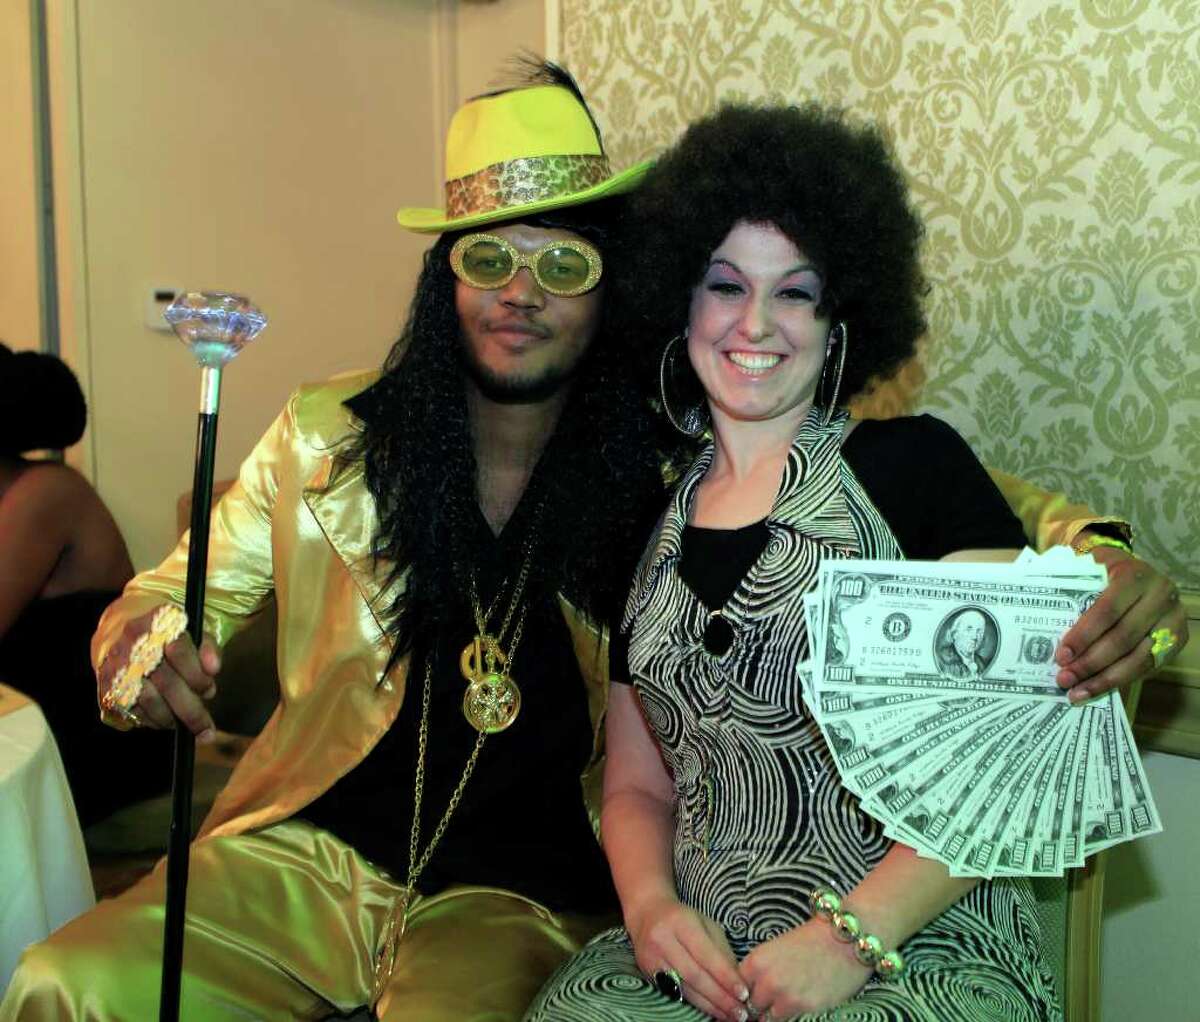 Dramone Snell, from the left, and Denise Comer put on the '70s bling at the Motown Party fundraiser for the Queen of Soul pageant at The Bright Shawl, Saturday, January 28, 2012.